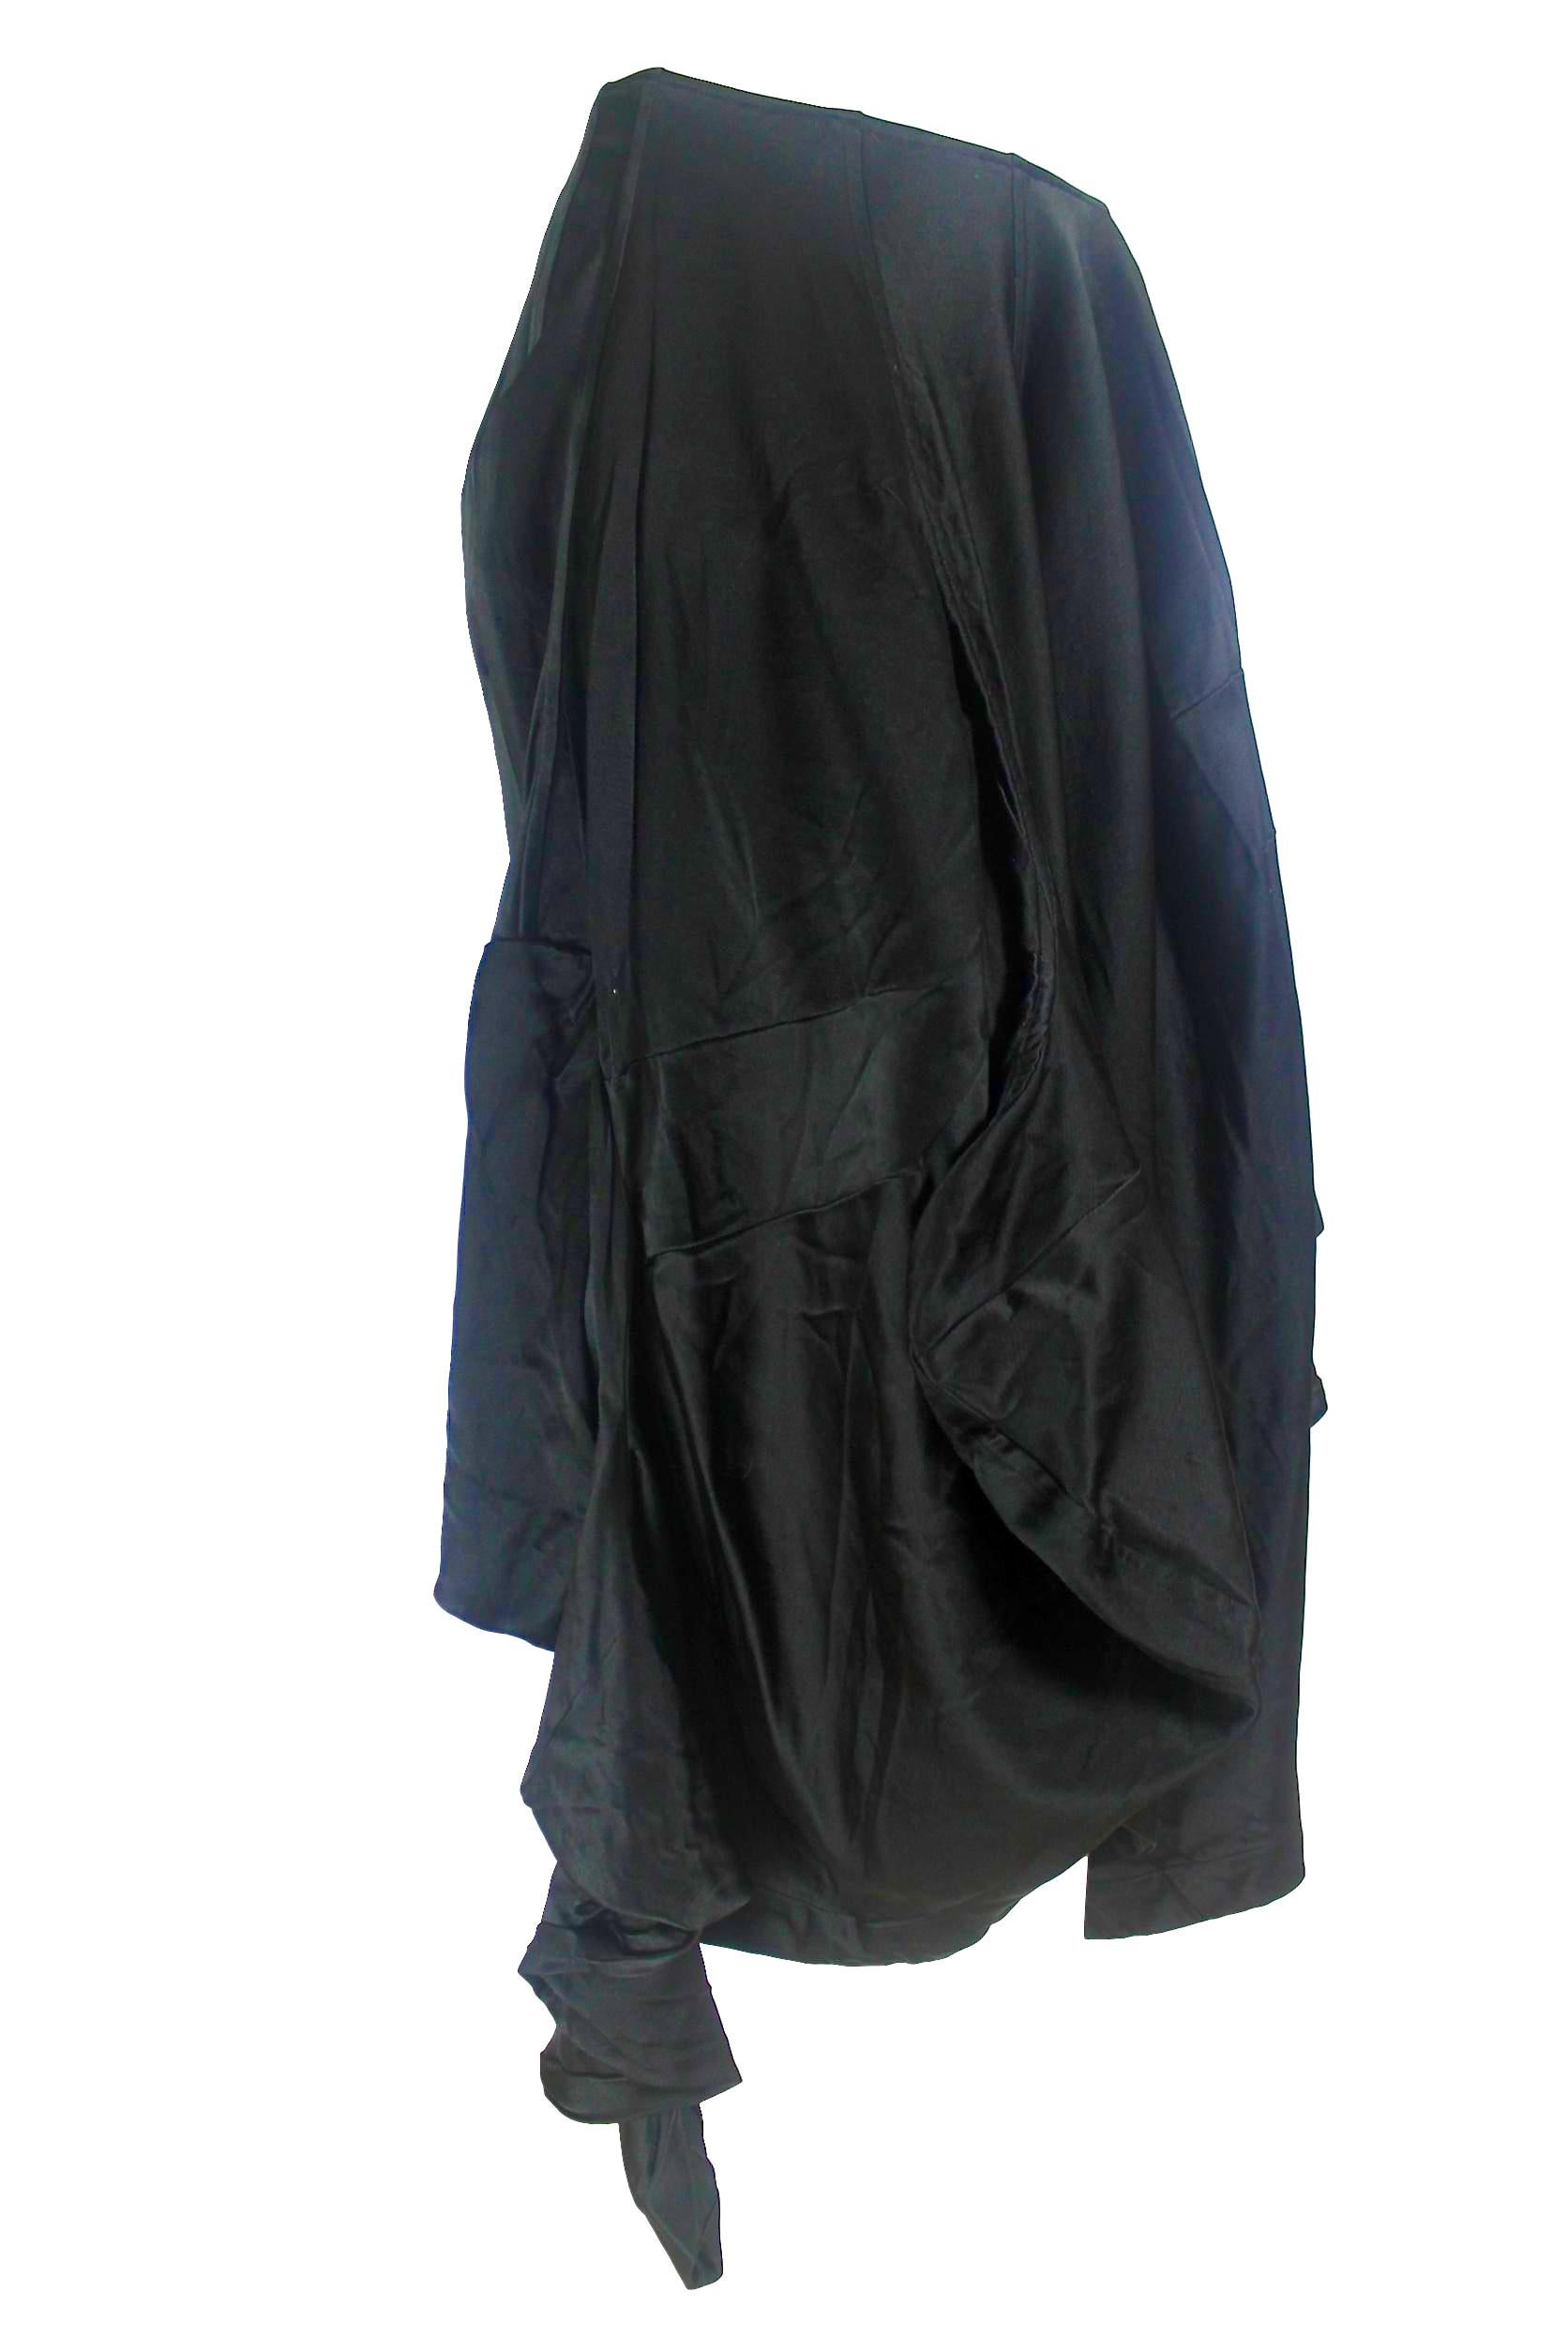 Women's Comme des Garcons Wool/Silk Twisted Sleeve Skirt AD 2004 Dark Romance For Sale